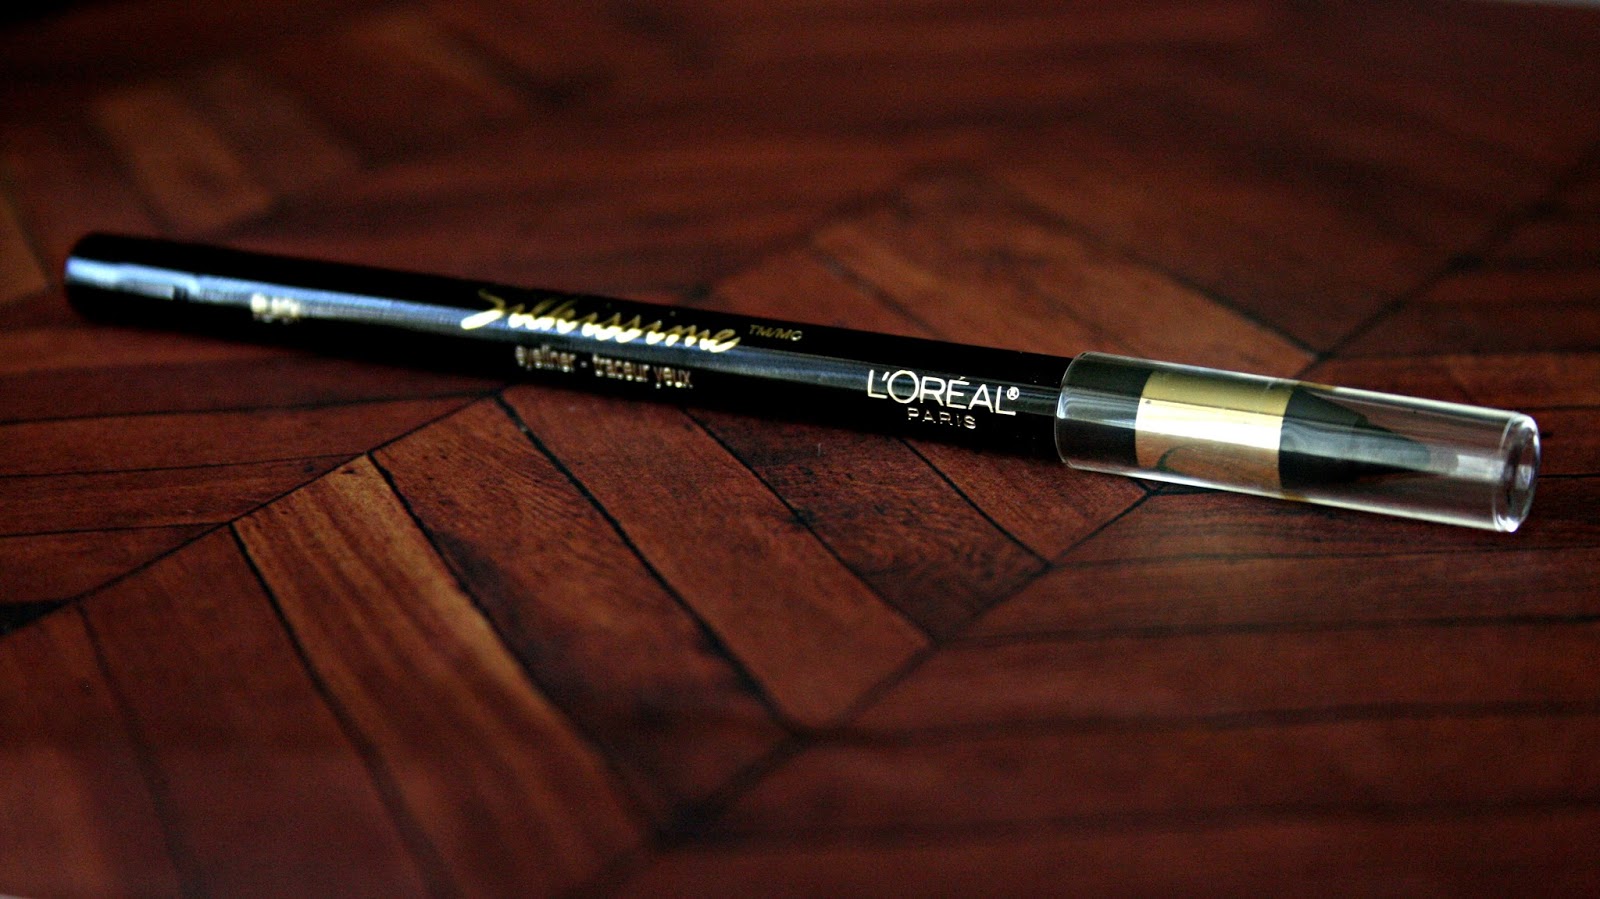 Makeup, Beauty and More: L'ORÉAL Infallible Silkissime Eyeliner in 200